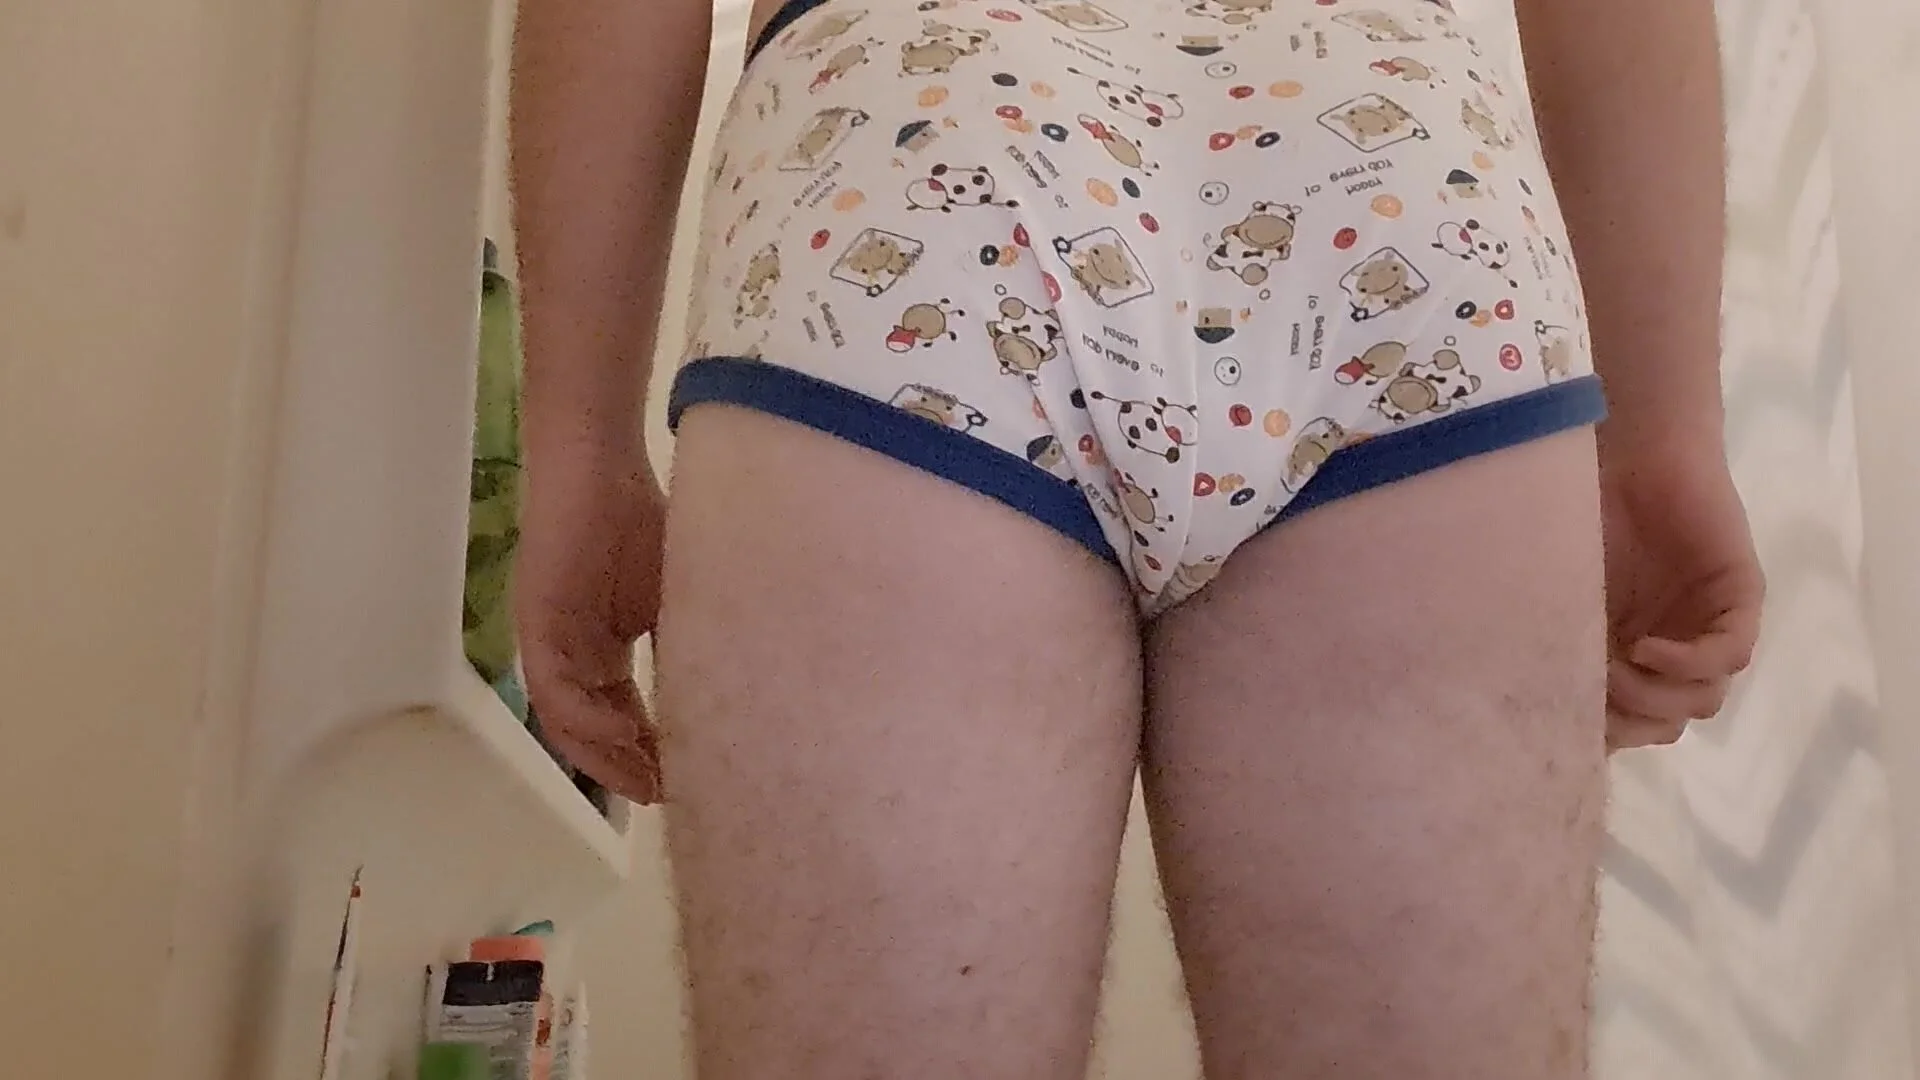 Adult fetish pooping and pissing in panties